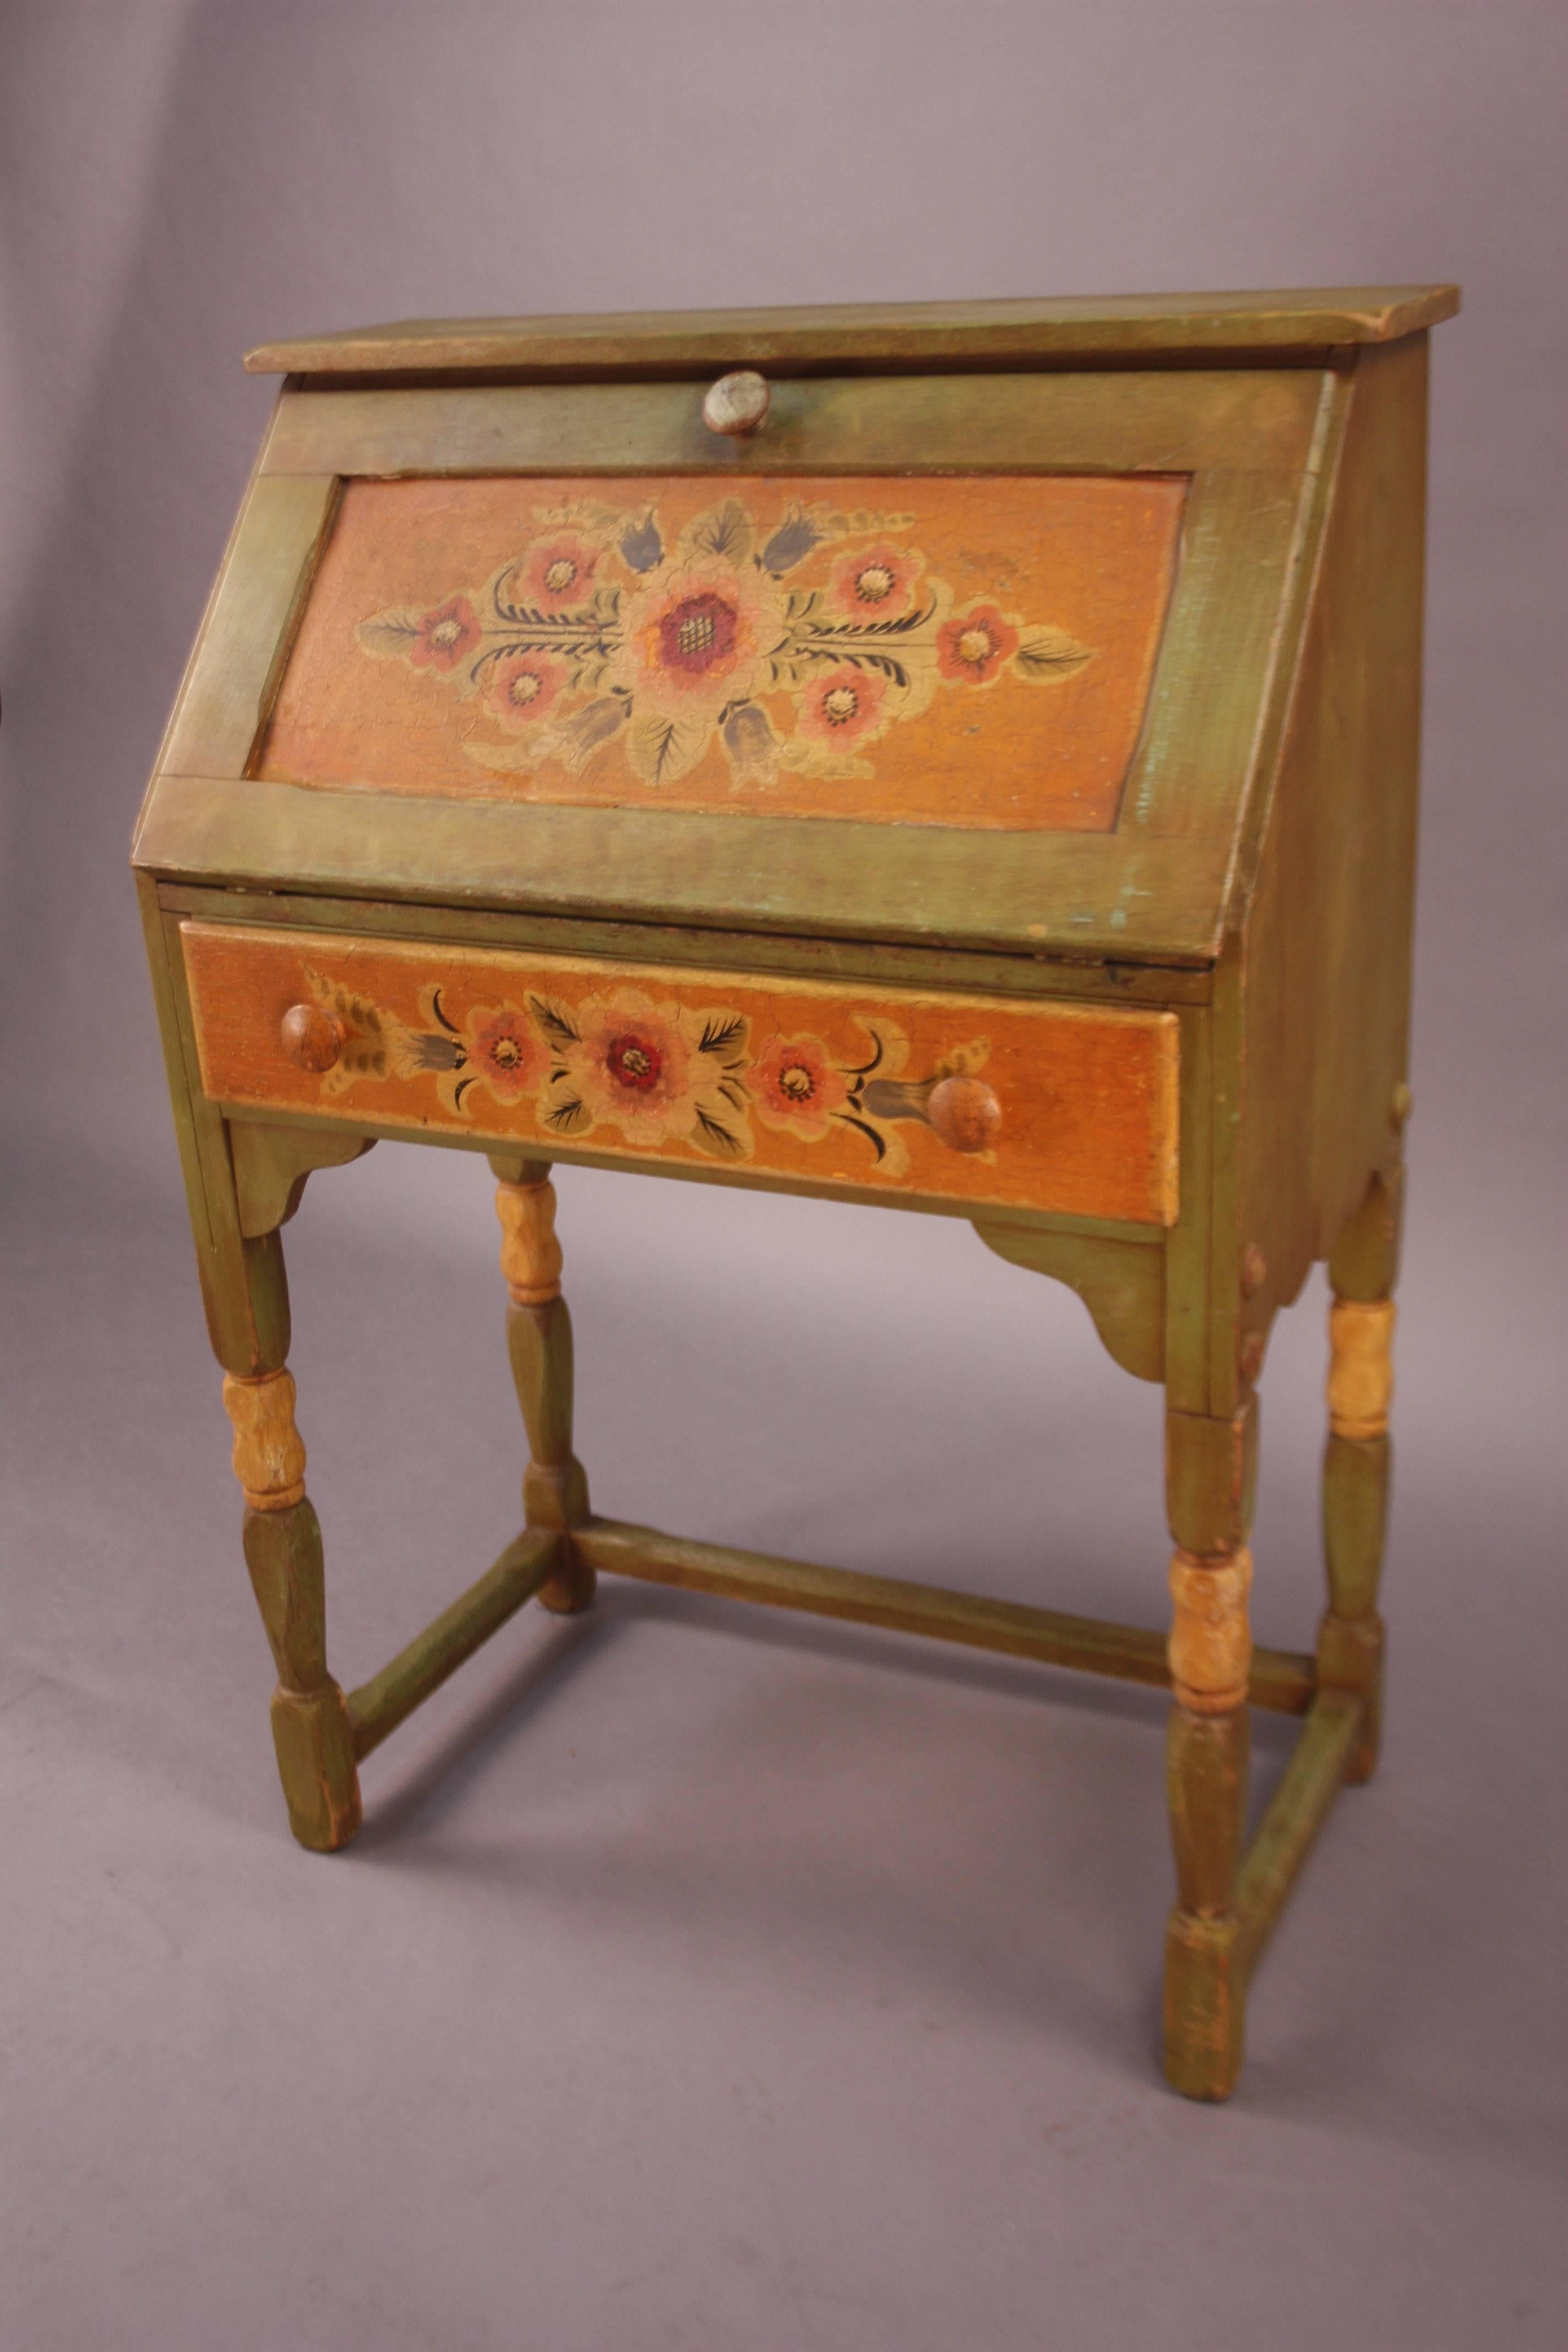 All original green and hand-painted Monterey desk with folding front panel and one drawer. Open the desk is 30